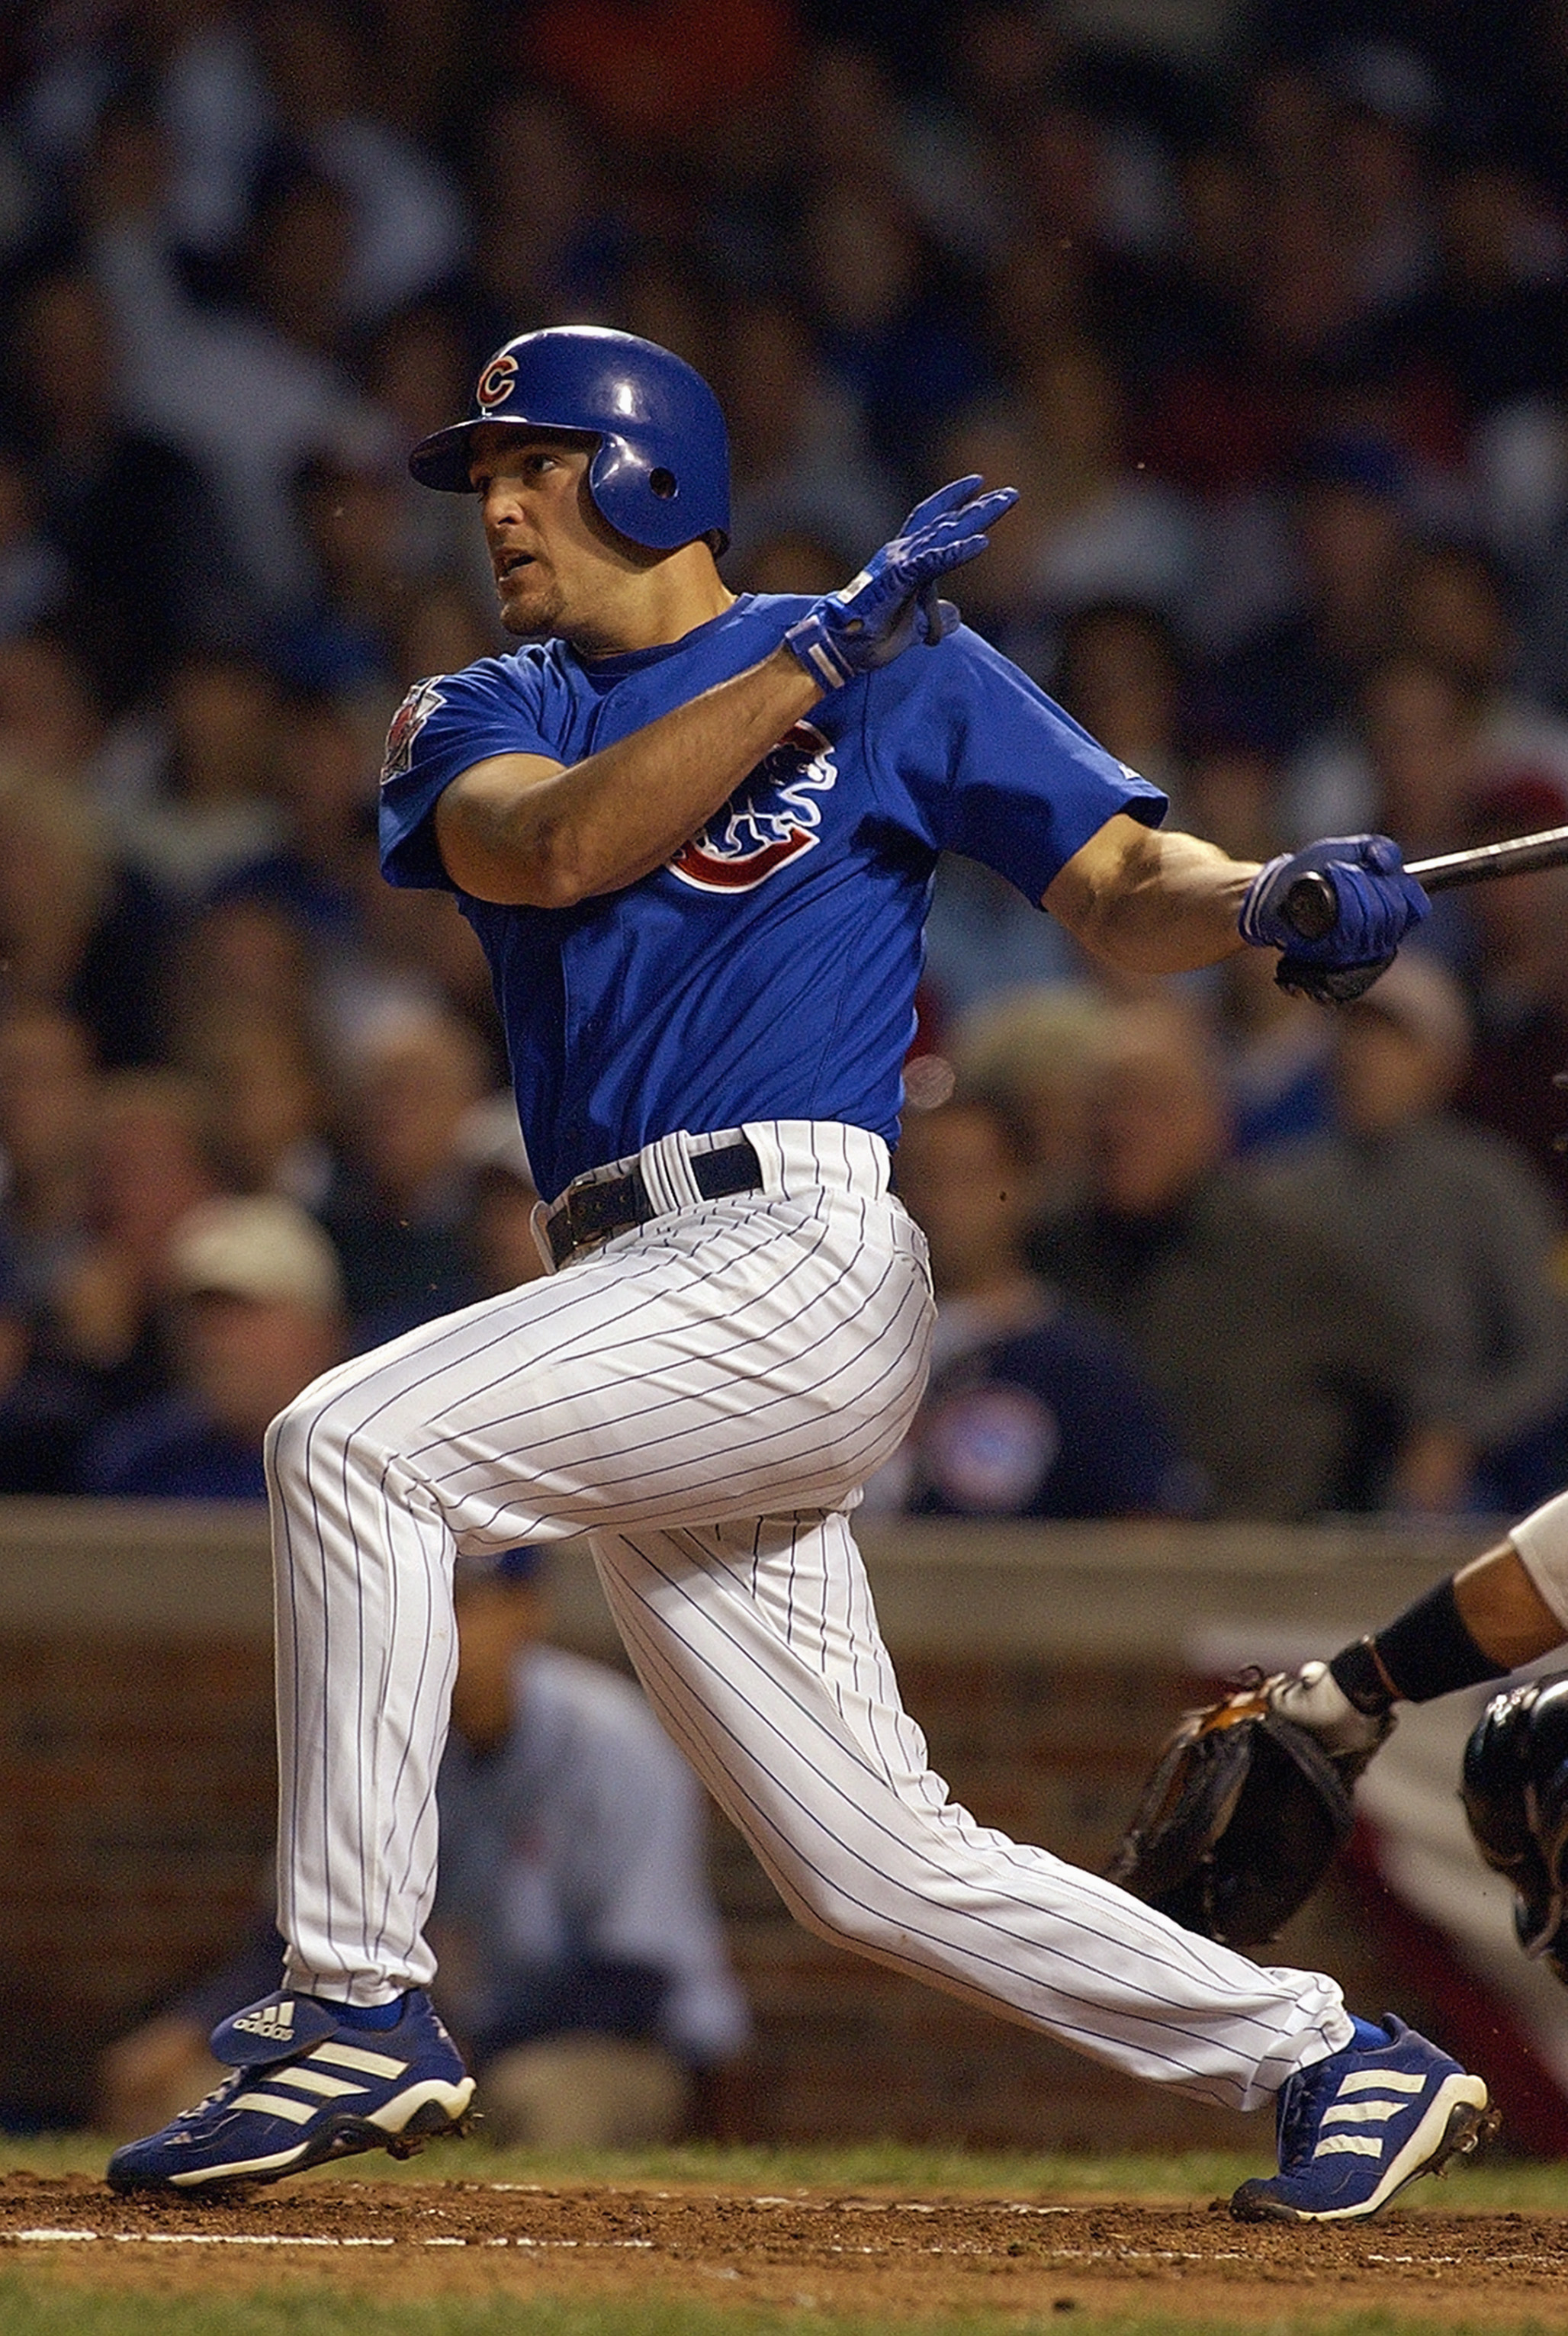 CHICAGO - OCTOBER 7:  Shortstop Alex Gonzalez #8 of the Chicago Cubs hits a home run in the sixth inning of game one of the National League Championship Series against the Florida Marlins on October 7, 2003 at Wrigley Field in Chicago, Illinois. The Marli